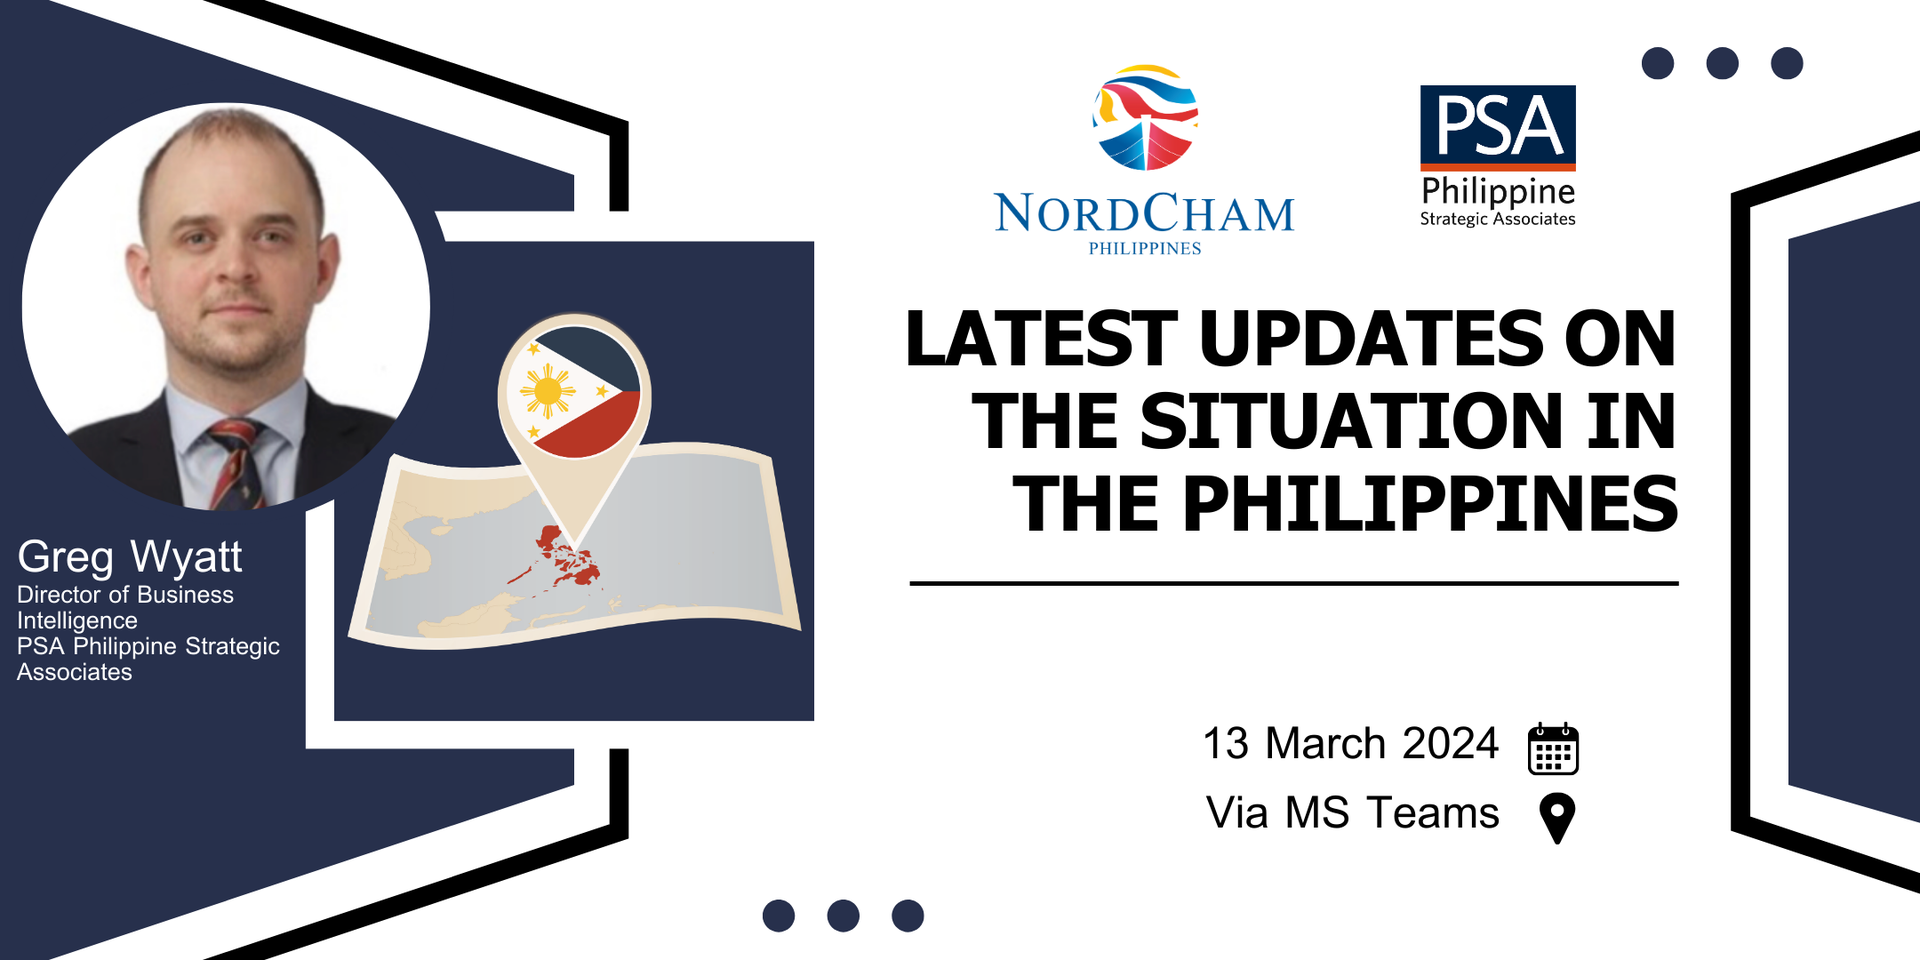 thumbnails [VIRTUAL EVENT] LATEST UPDATES ON THE SITUATION IN THE PHILIPPINES WITH PSA